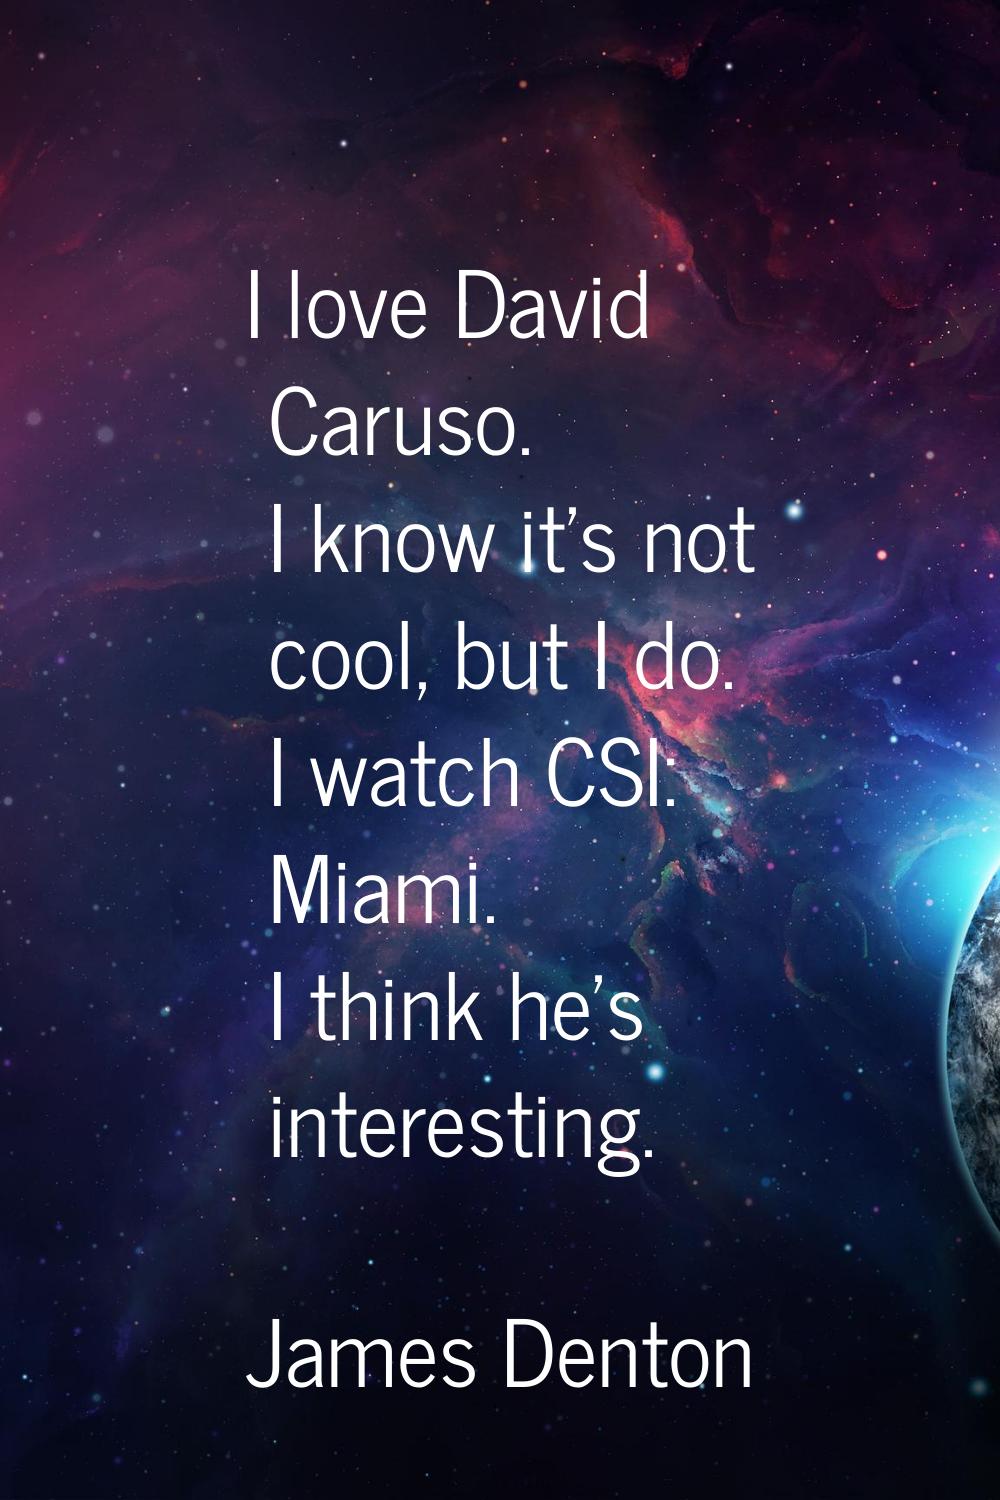 I love David Caruso. I know it's not cool, but I do. I watch CSI: Miami. I think he's interesting.